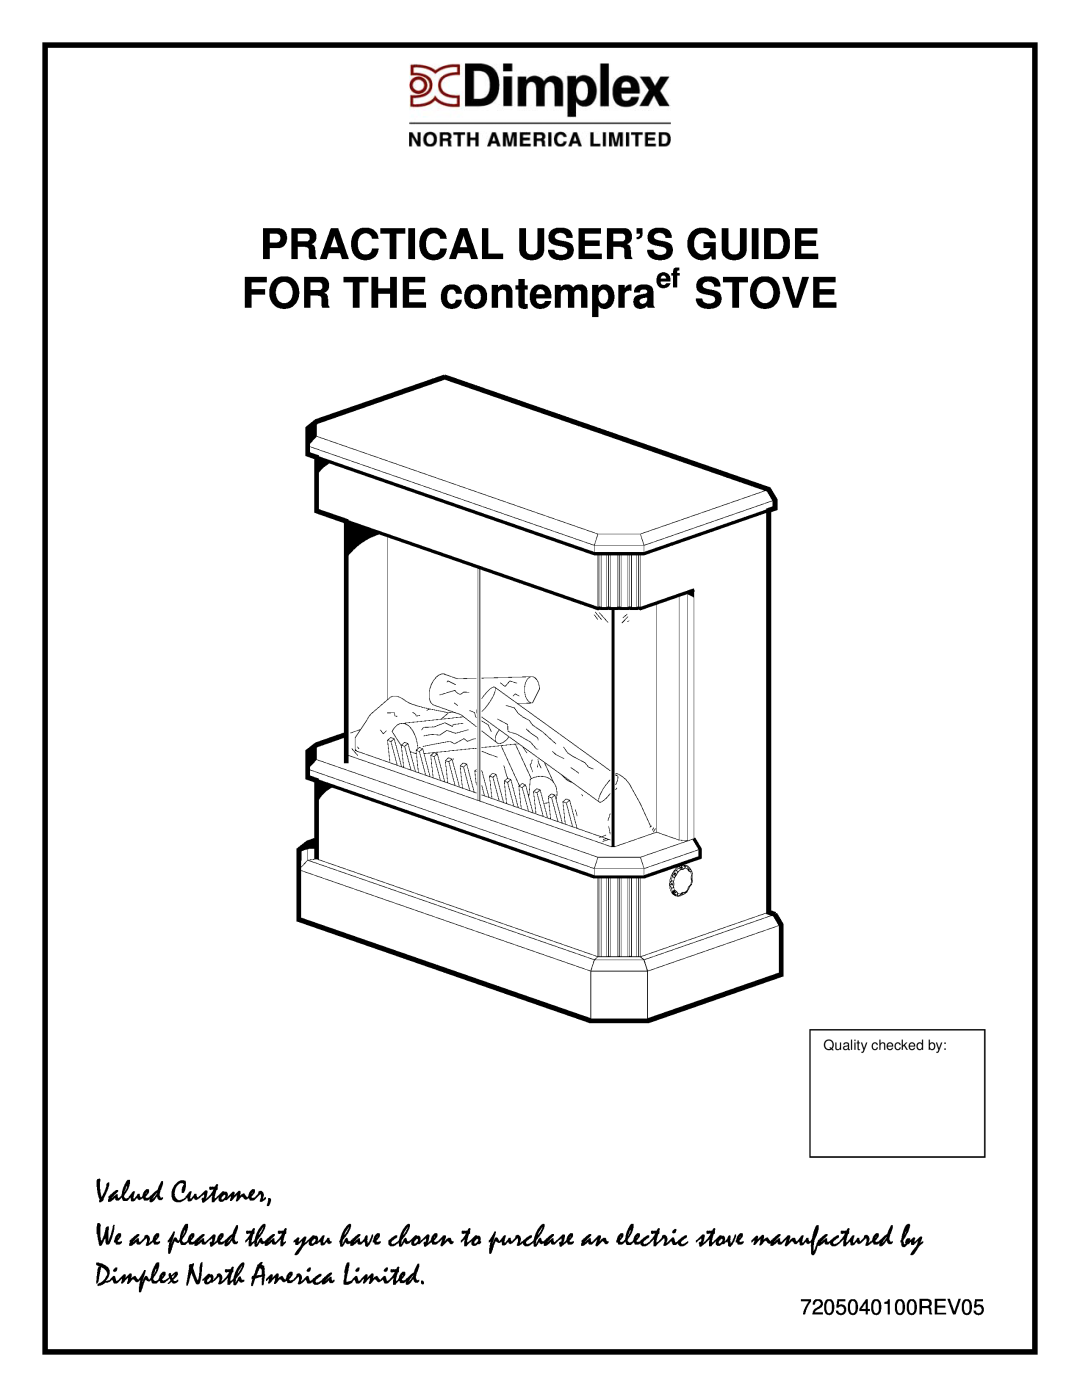 Dimplex KDS6401E manual PRACTICAL USER’S GUIDE FOR THE contempraef STOVE, Valued Customer, Quality checked by 